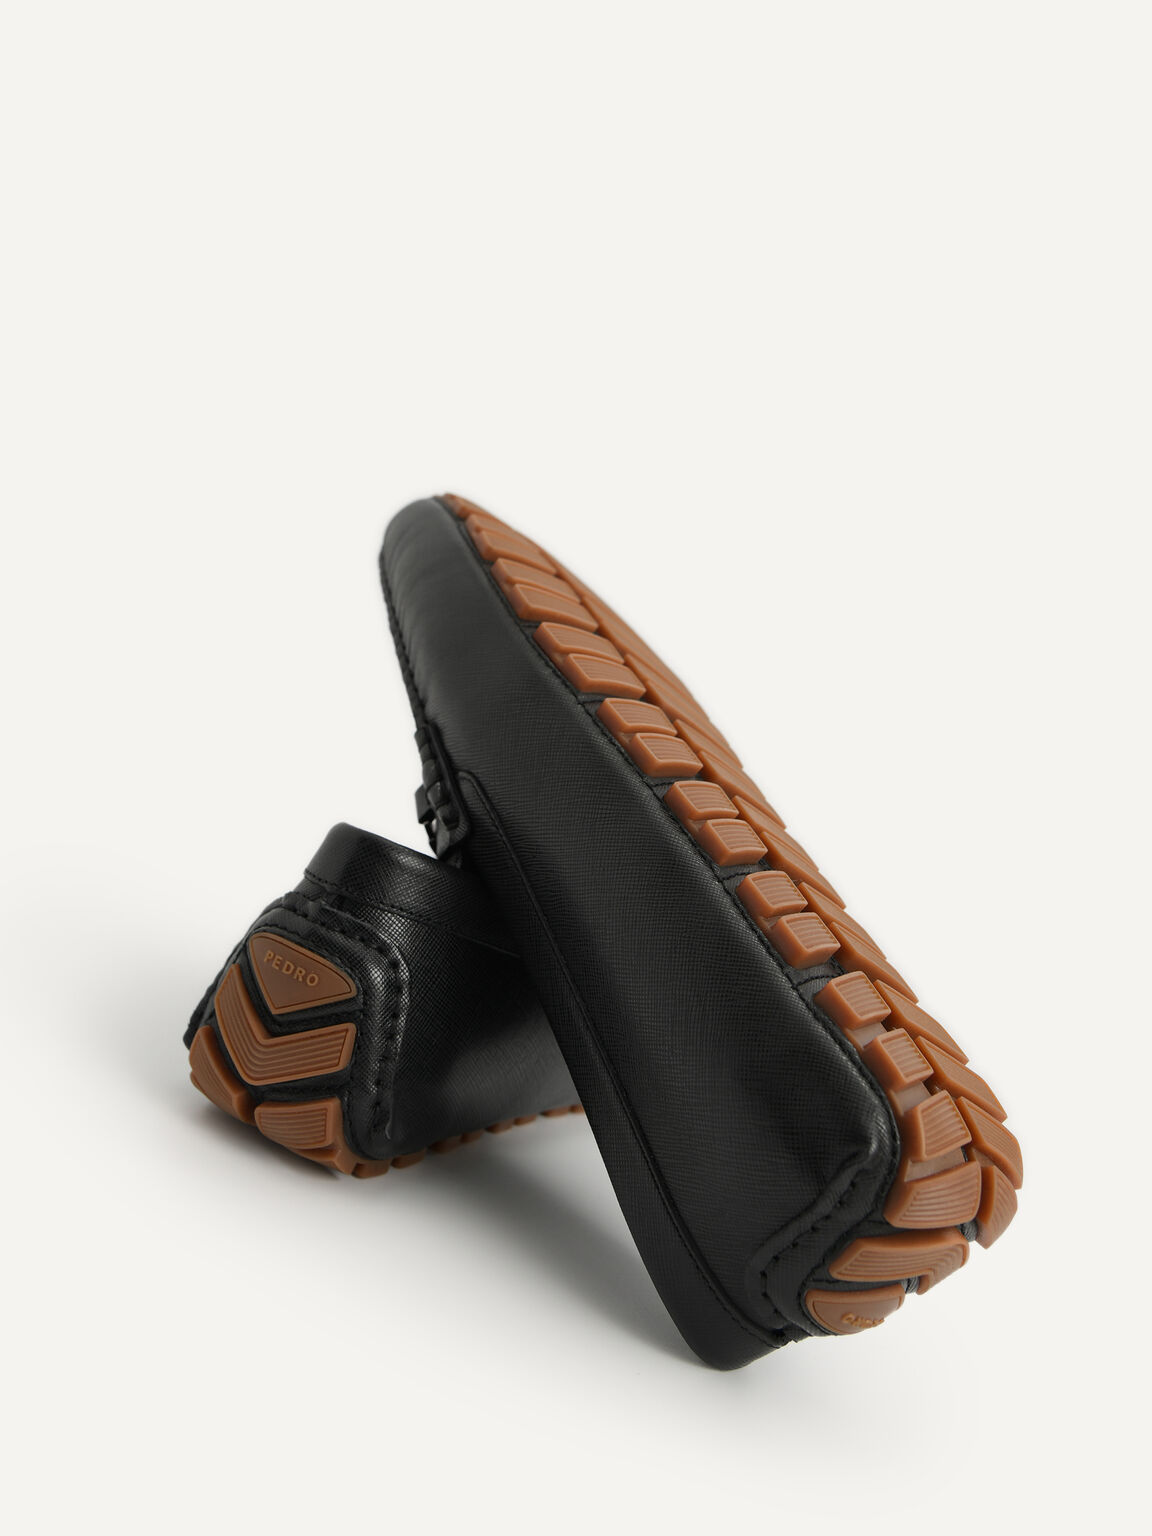 Leather Moccasins with Metal Bit, Black